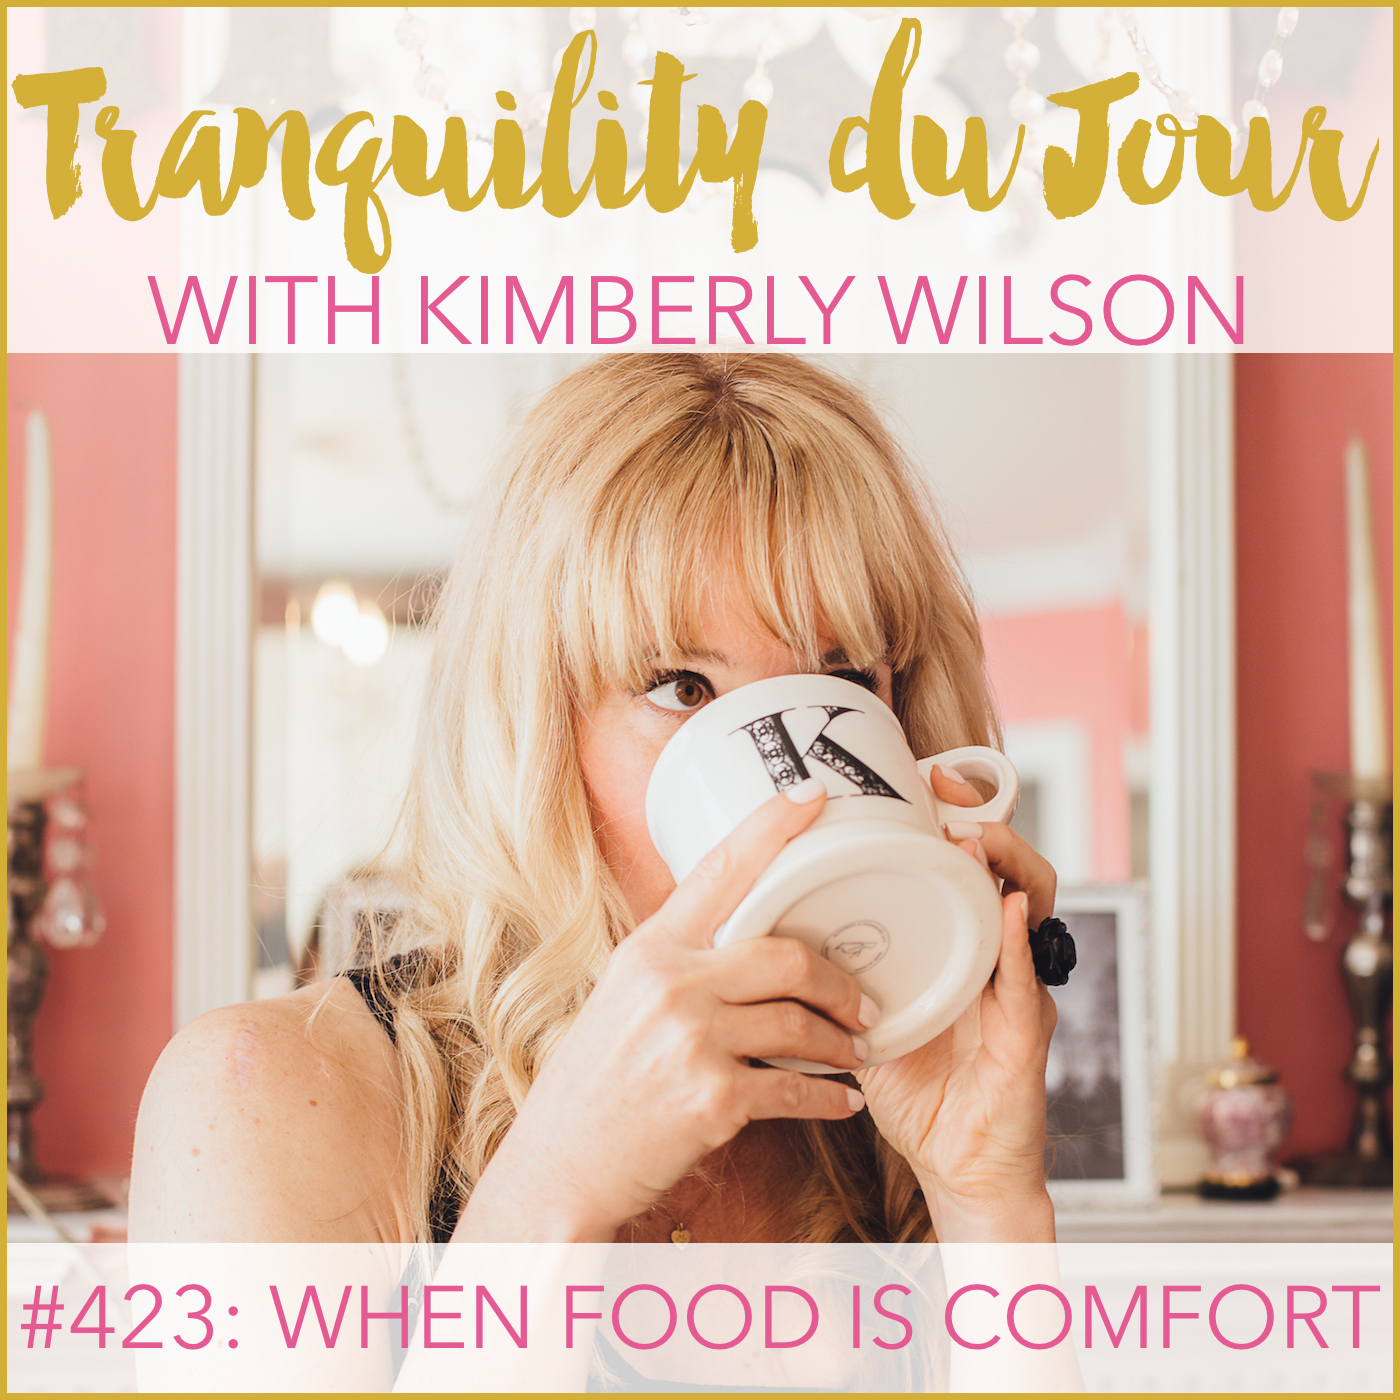 Tranquility du Jour #423: When Food is Comfort 